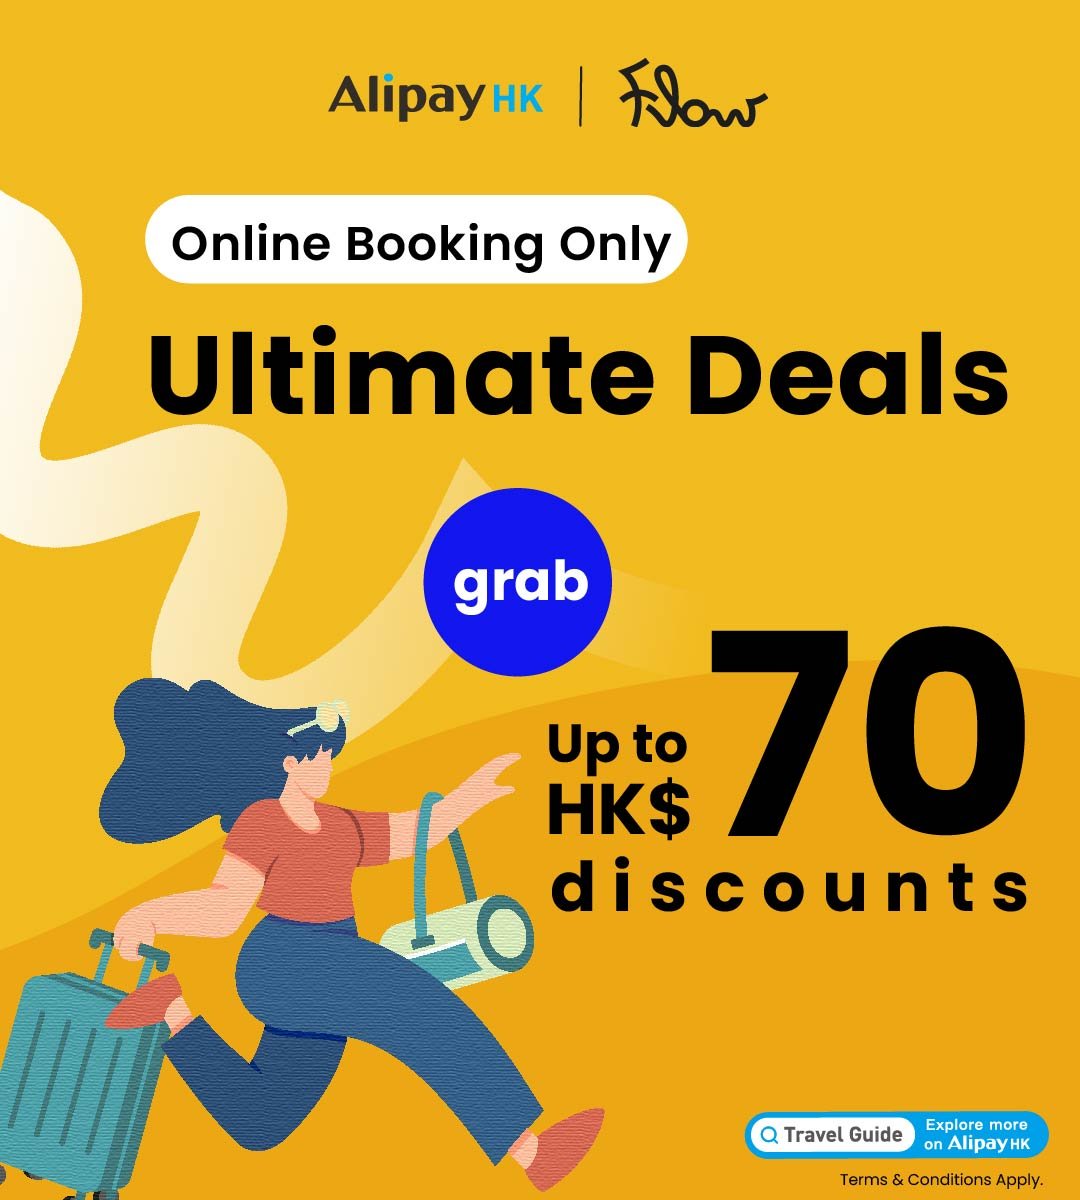 AlipayHK Ultimate Deals: Grab up to HK$70 Coupon Now